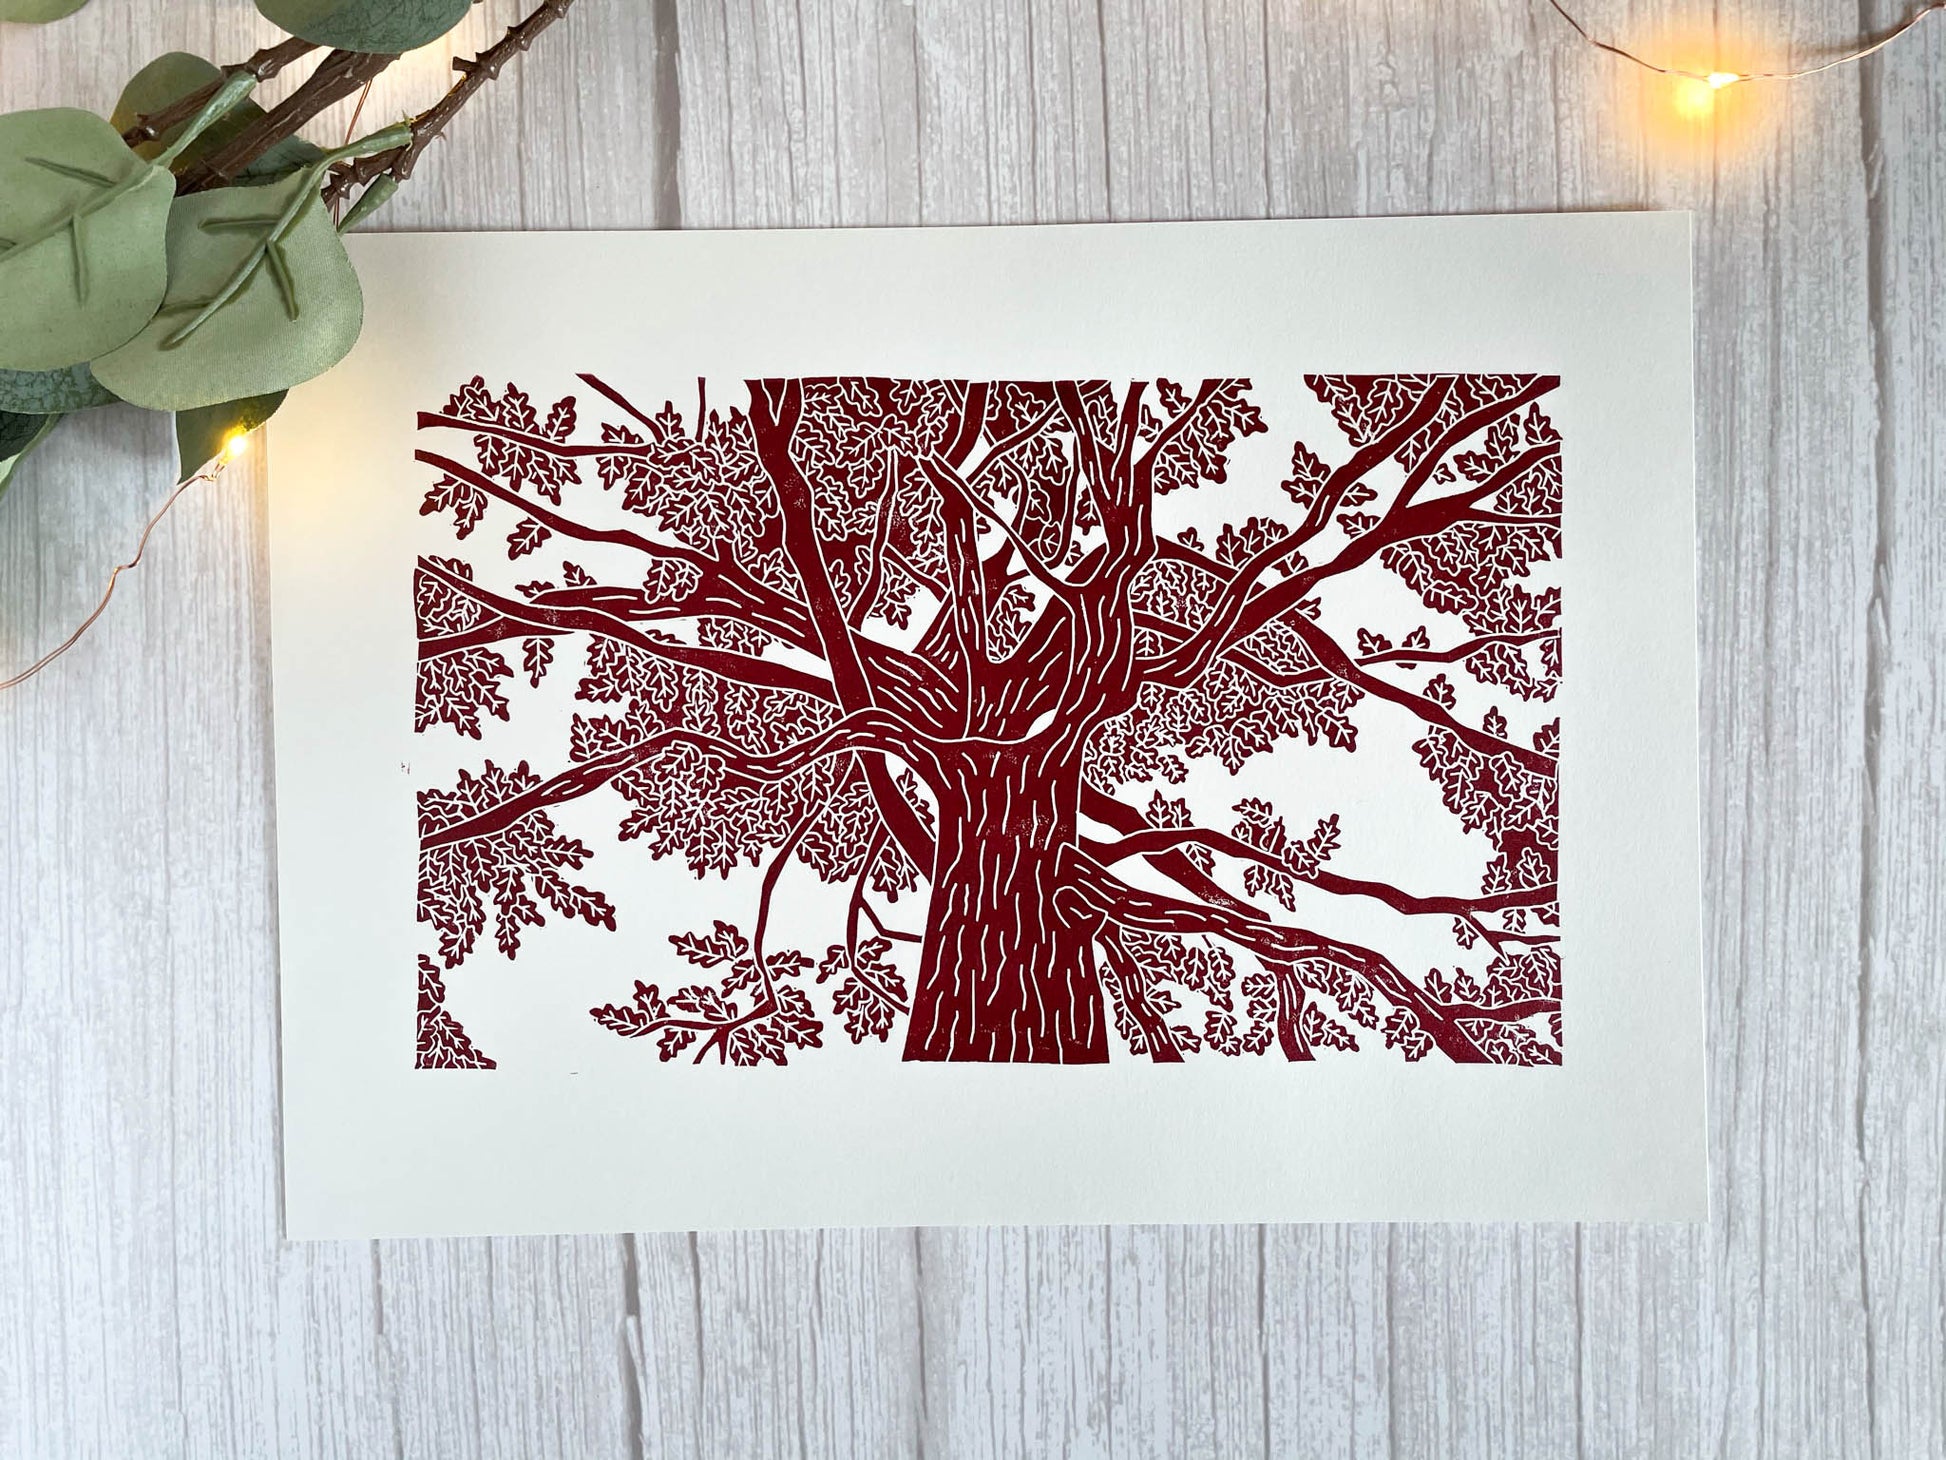 A lino print of an oak tree as viewed from standing under it and looking up in red